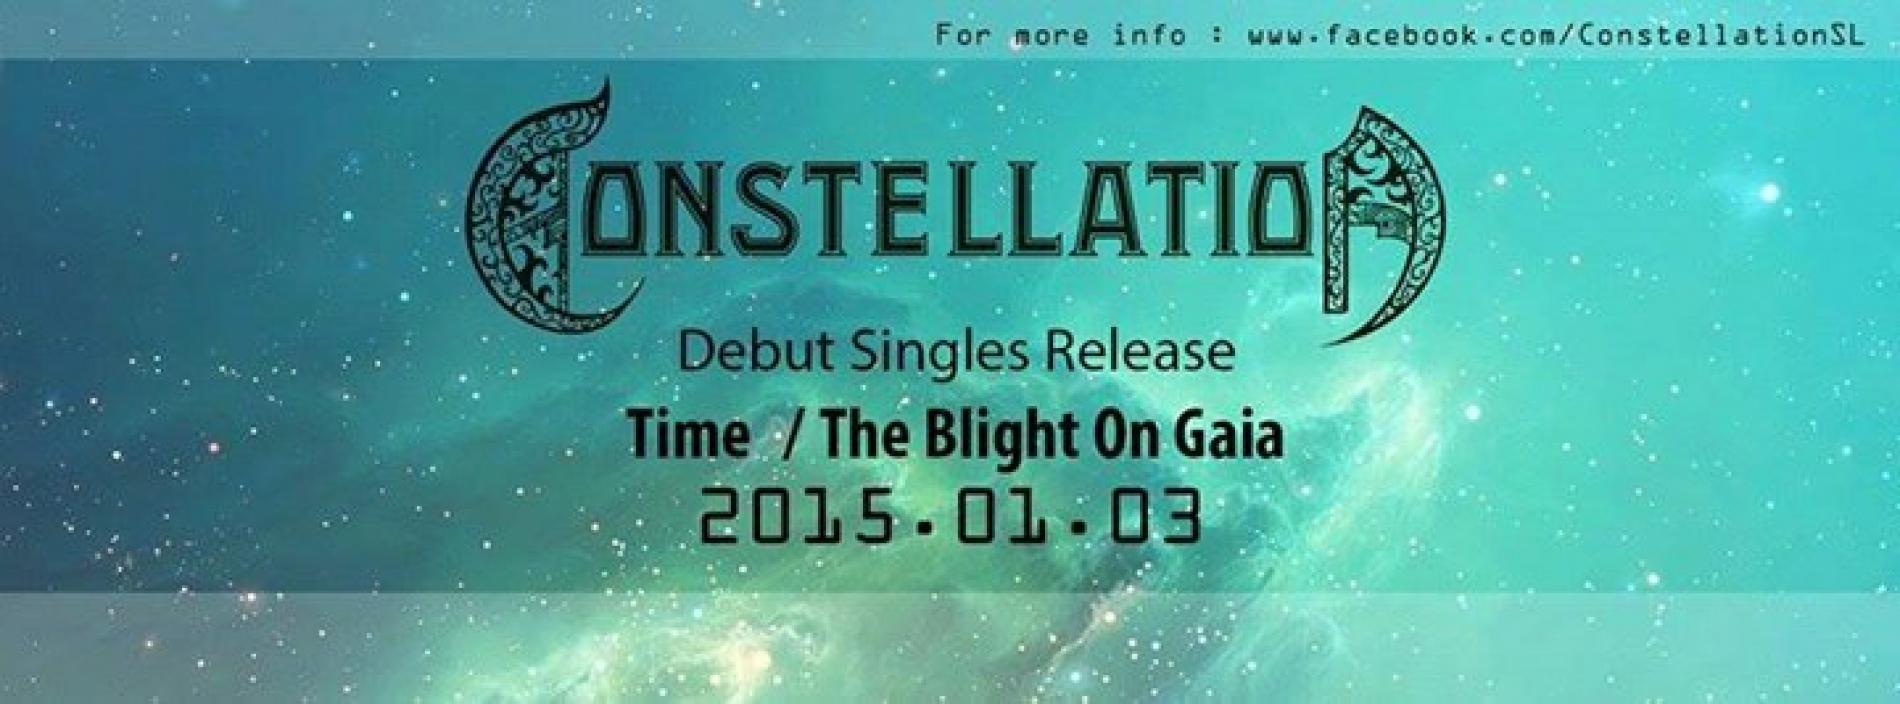 Constellation Announces A Release Date For Their Single: The Blight Of Gaia